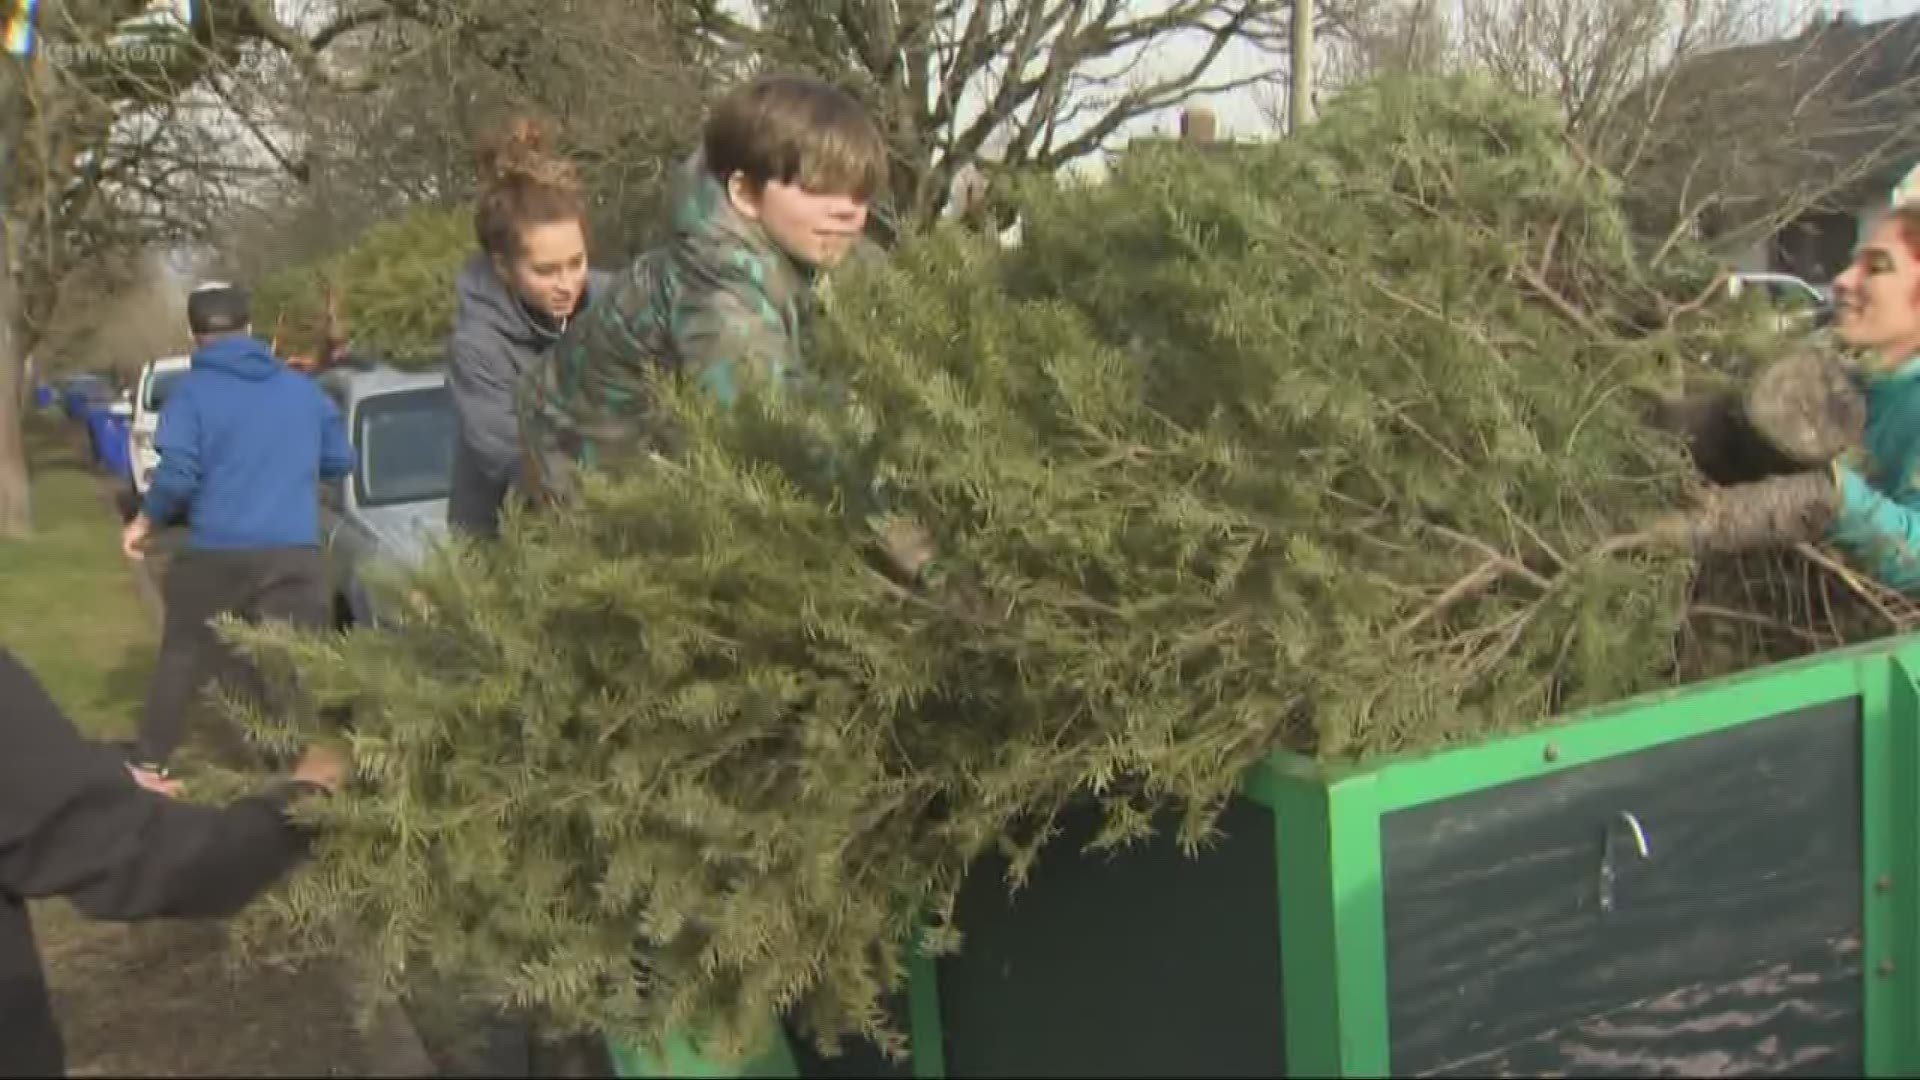 There are a lot of places in the Portland metro area to recycle your tree and also do some good in the community.